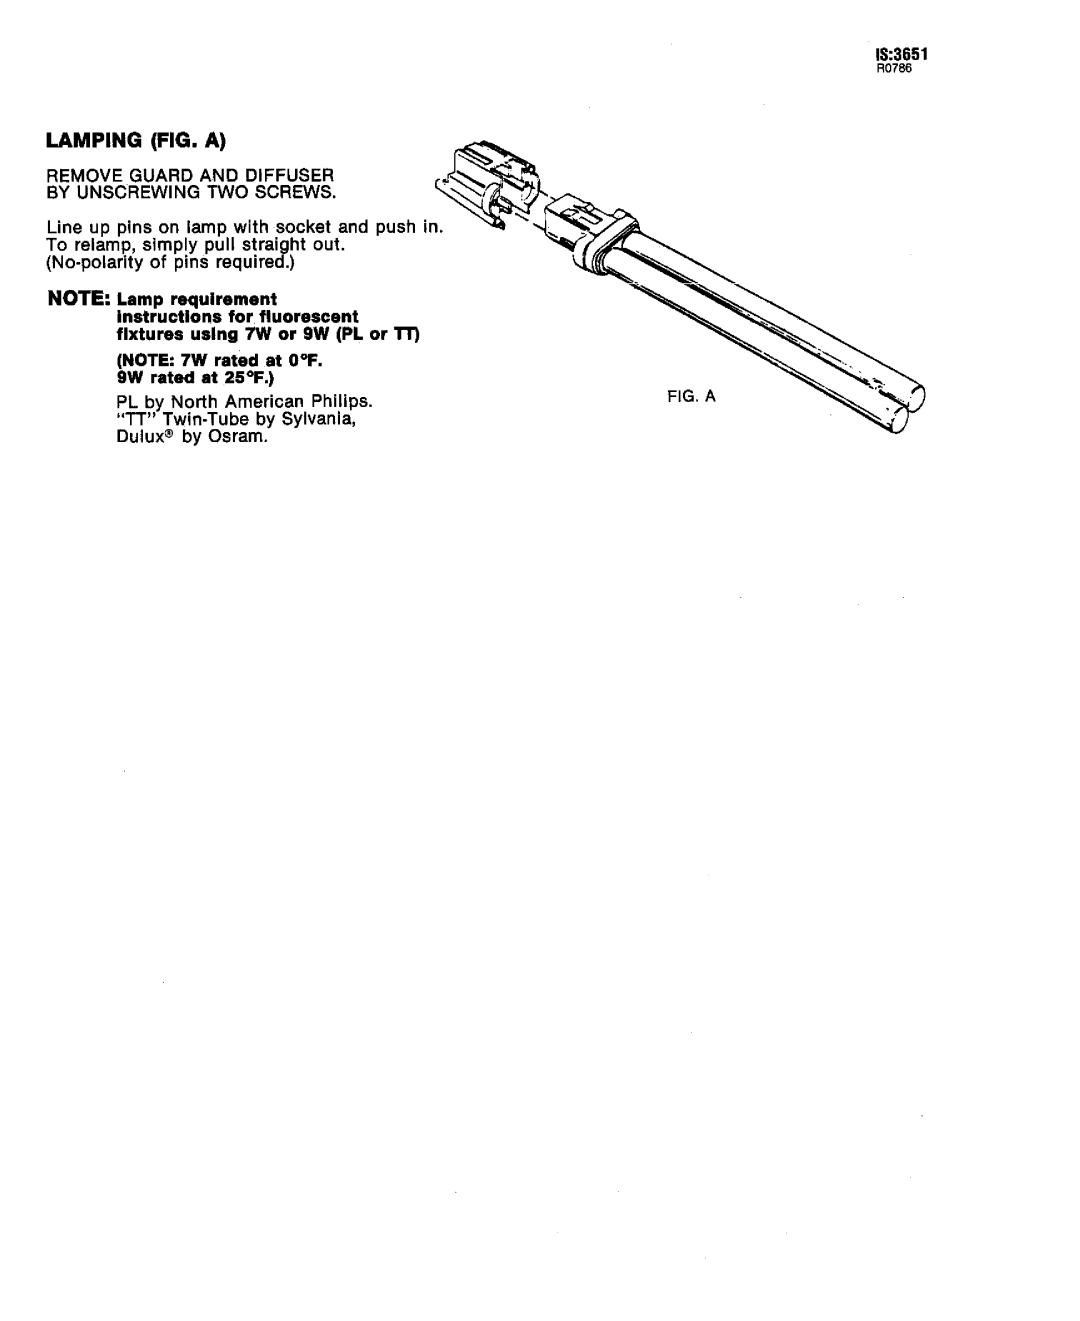 Lightolier IS:3651 Lamping Fig. A, Lamp requirement Instructions for fluorescent, flxturee uelng 7W or 9W PL or lT, ‘Ga F% 